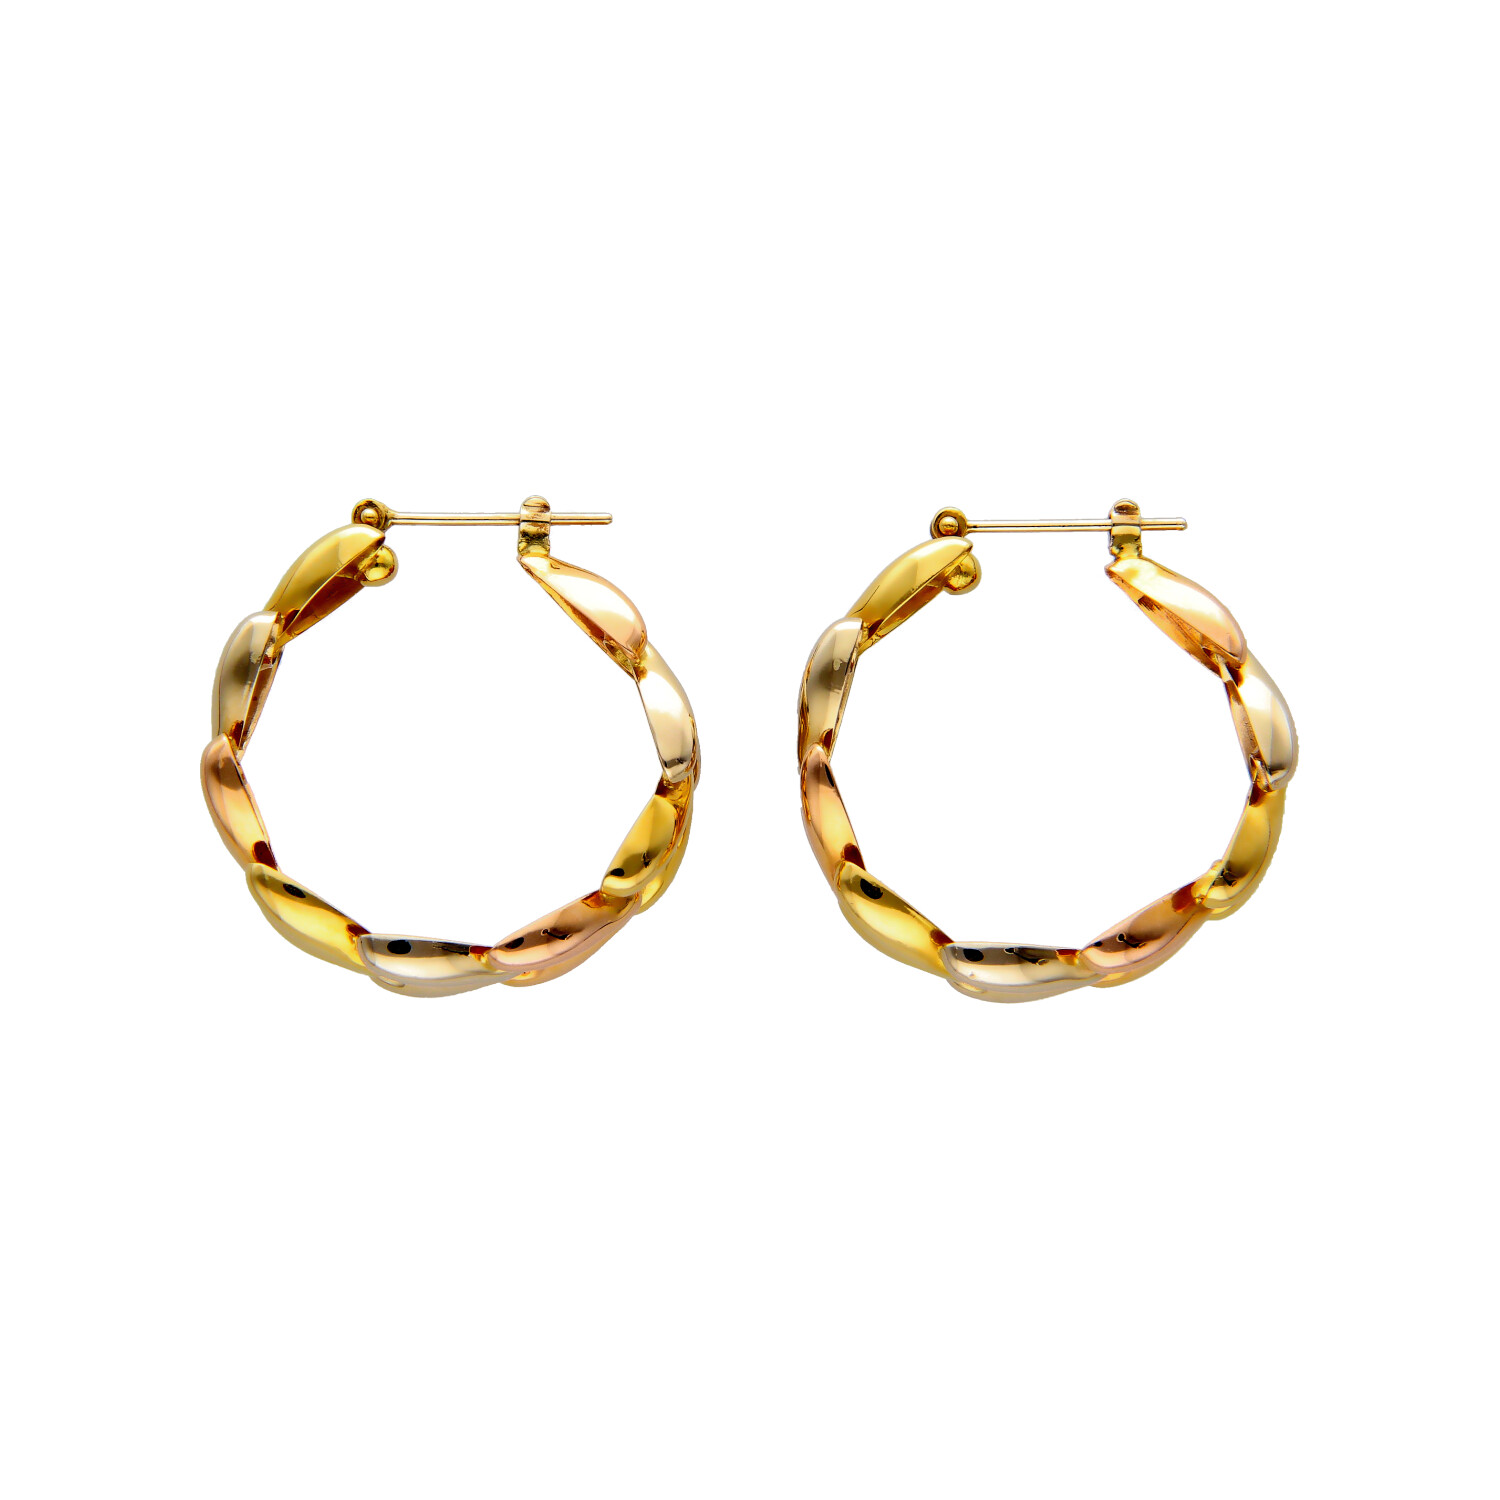 Rose, yellow, and white gold circle earrings with hearts